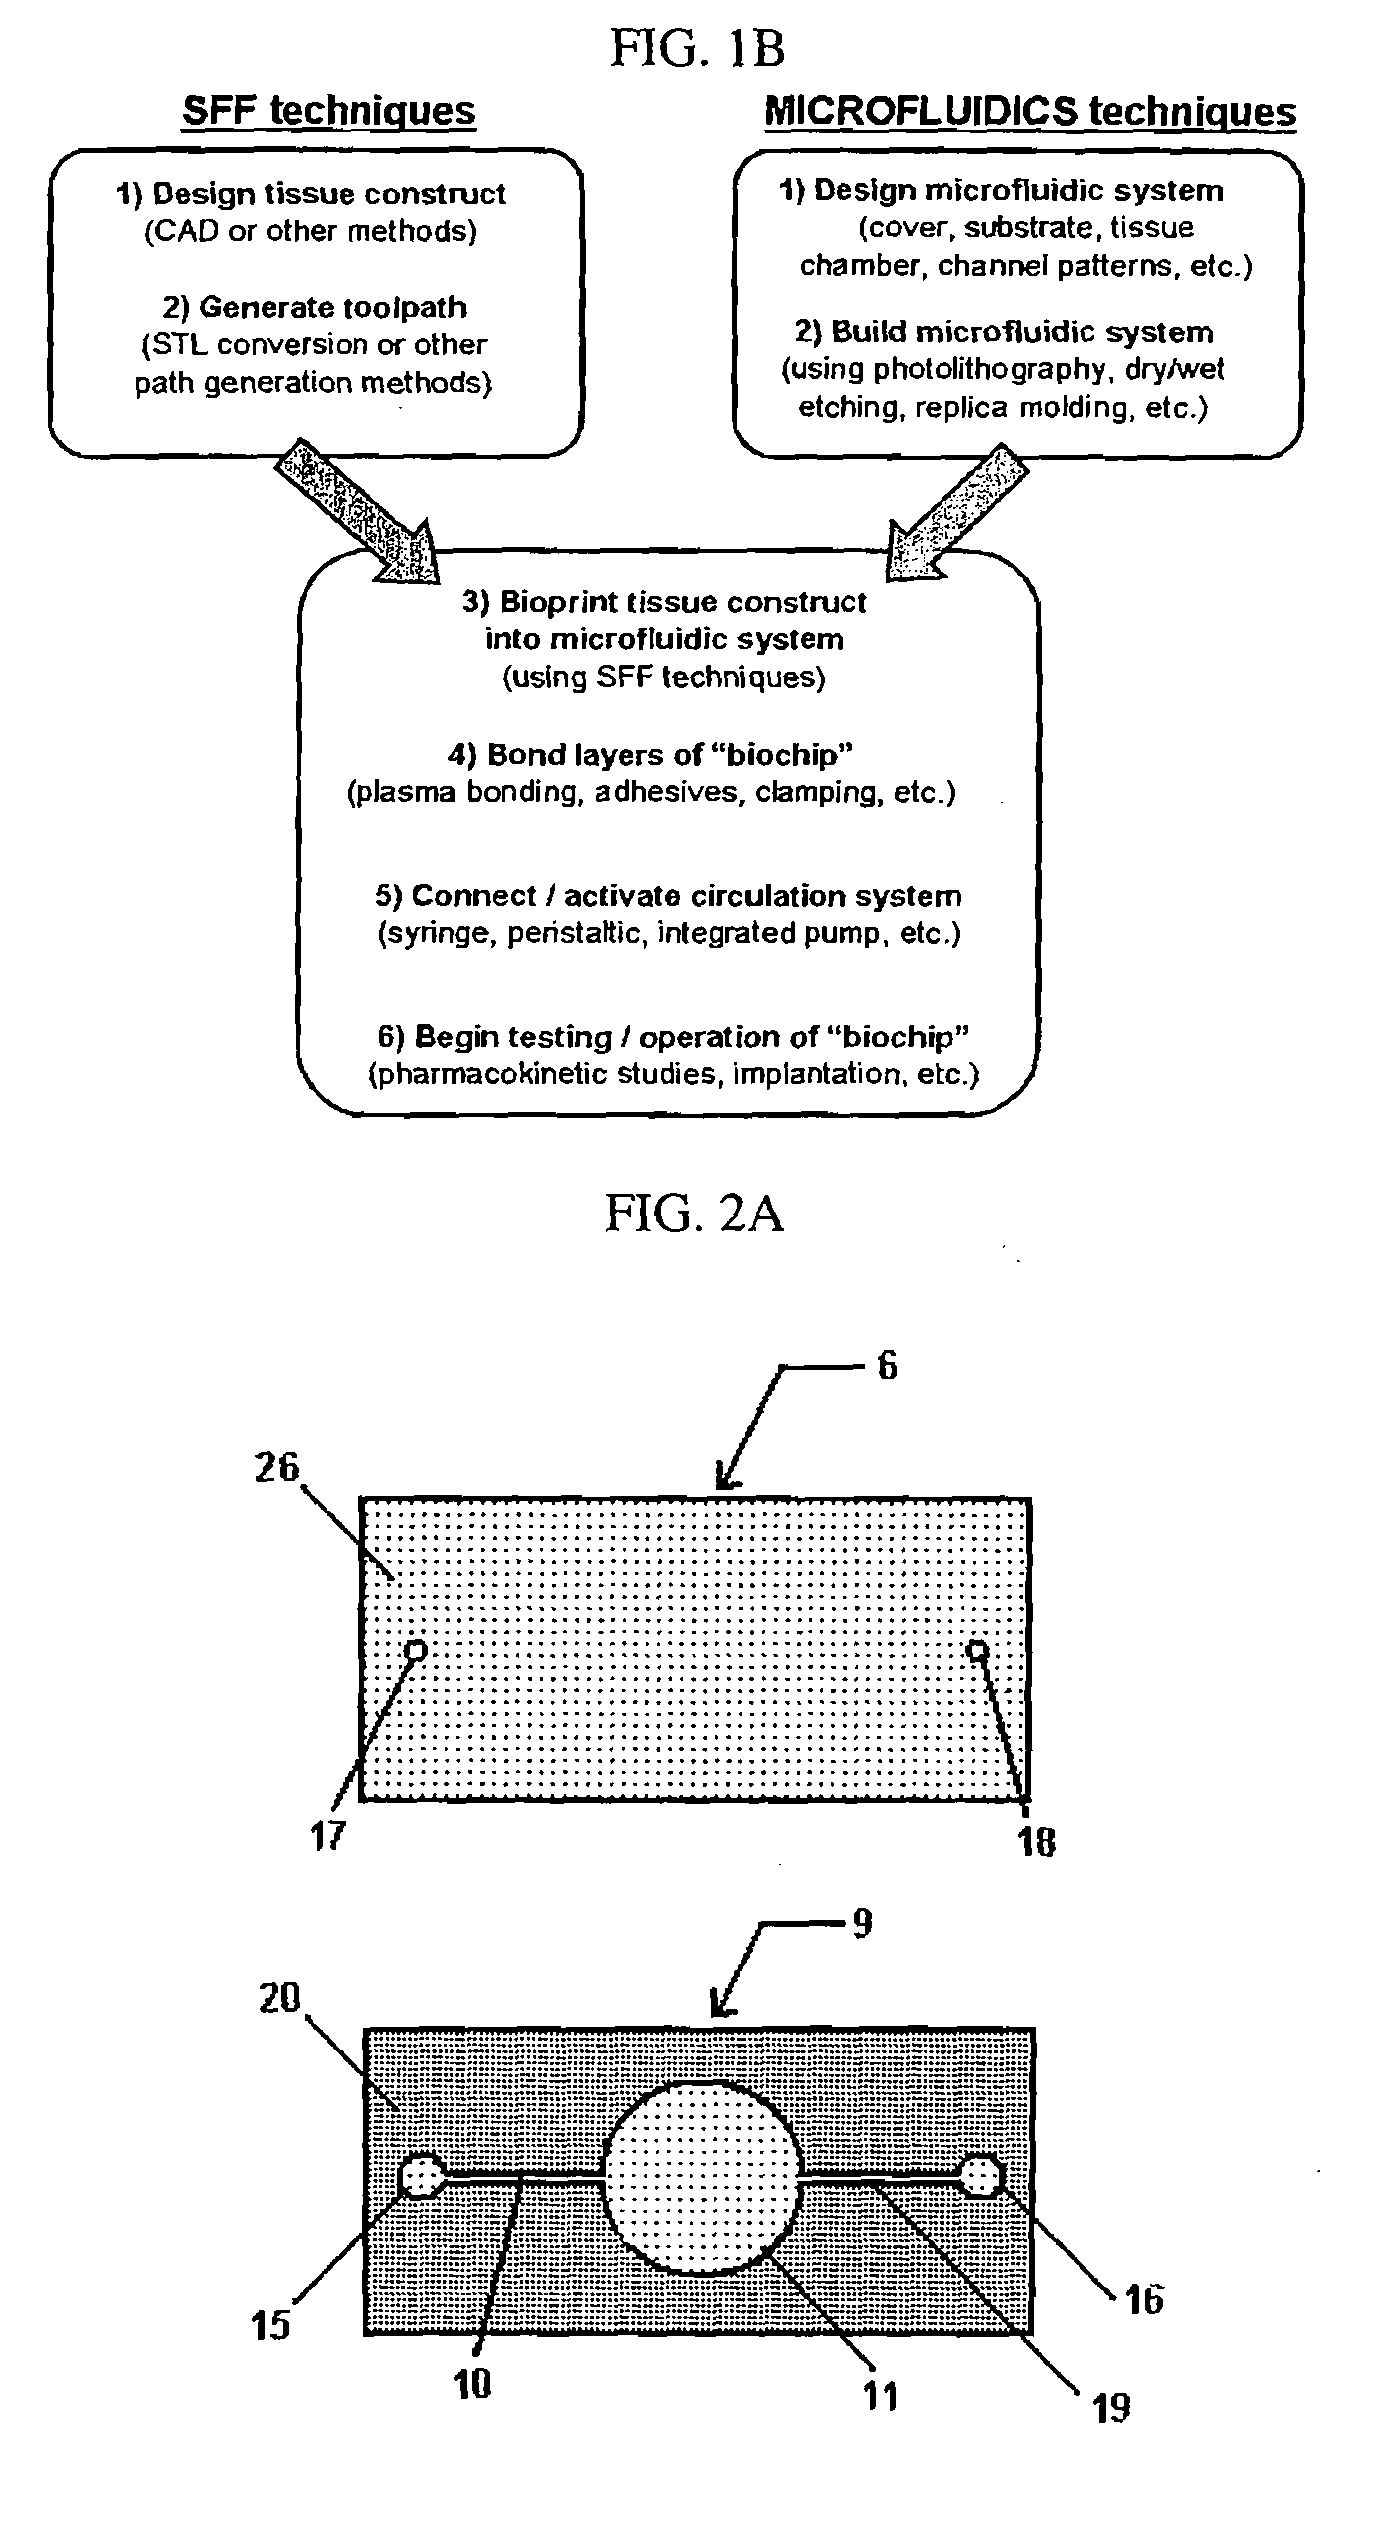 Bioprinting Three-Dimensional Structure Onto Microscale Tissue Analog Devices for Pharmacokinetic Study and Other Uses